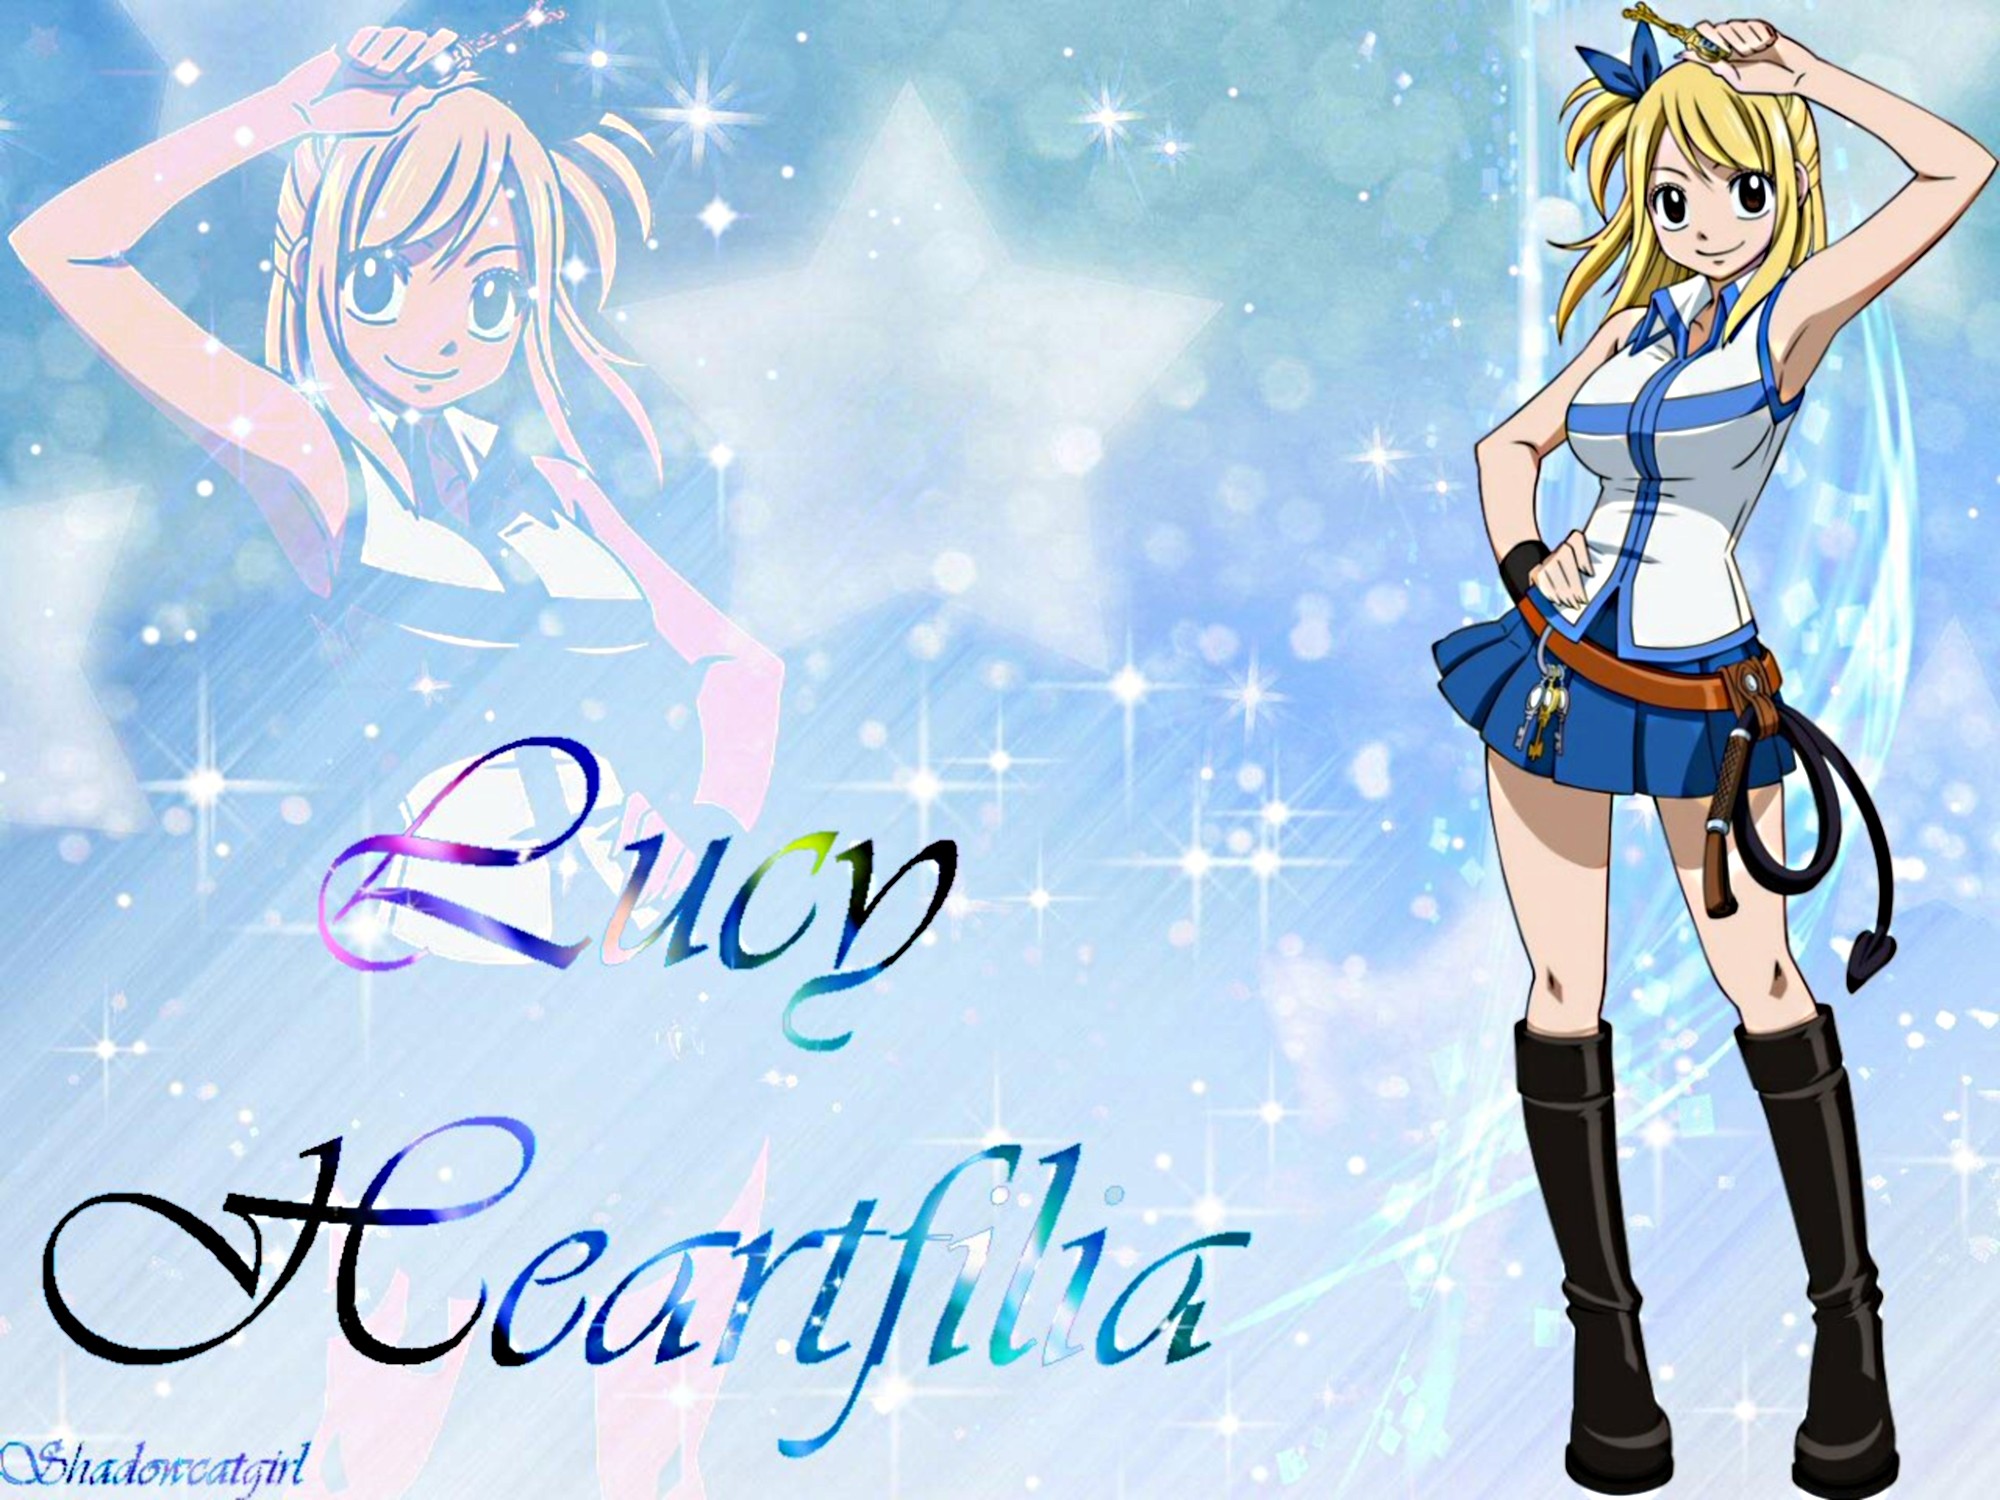 2000x1500 Fairy Tail images Lucy Heartfilia~! HD wallpaper and background photos